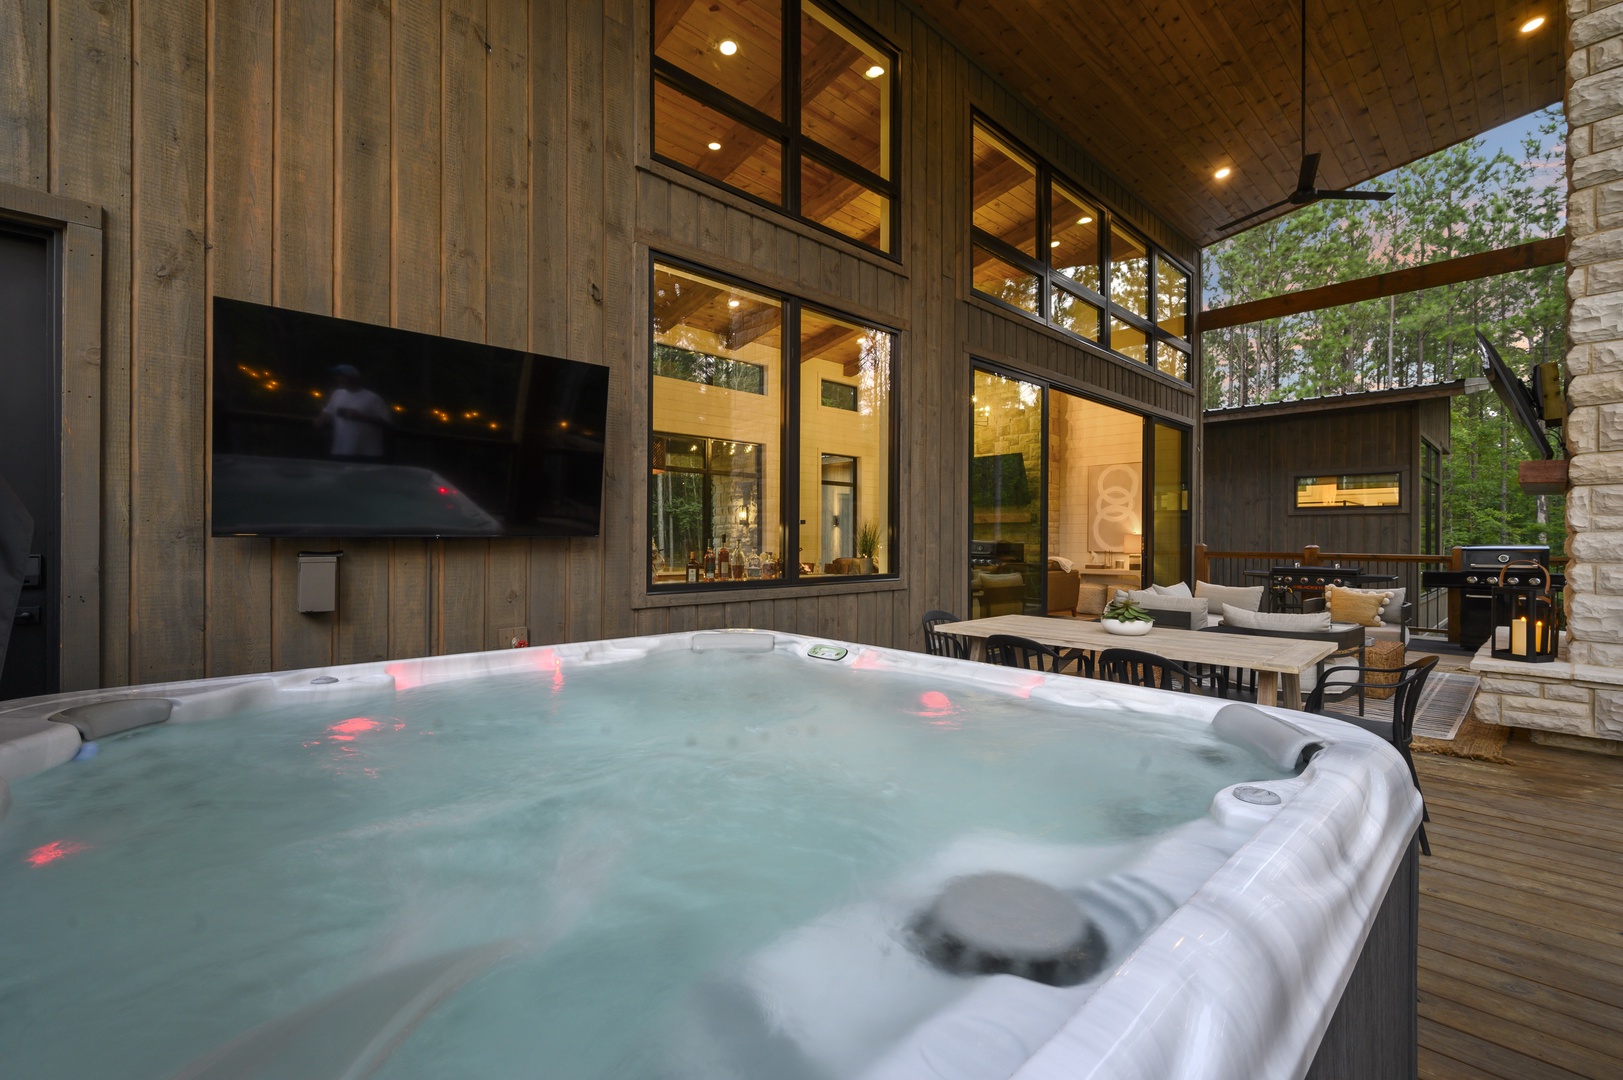 Don't miss a minute of the game while you relax in the hot tub